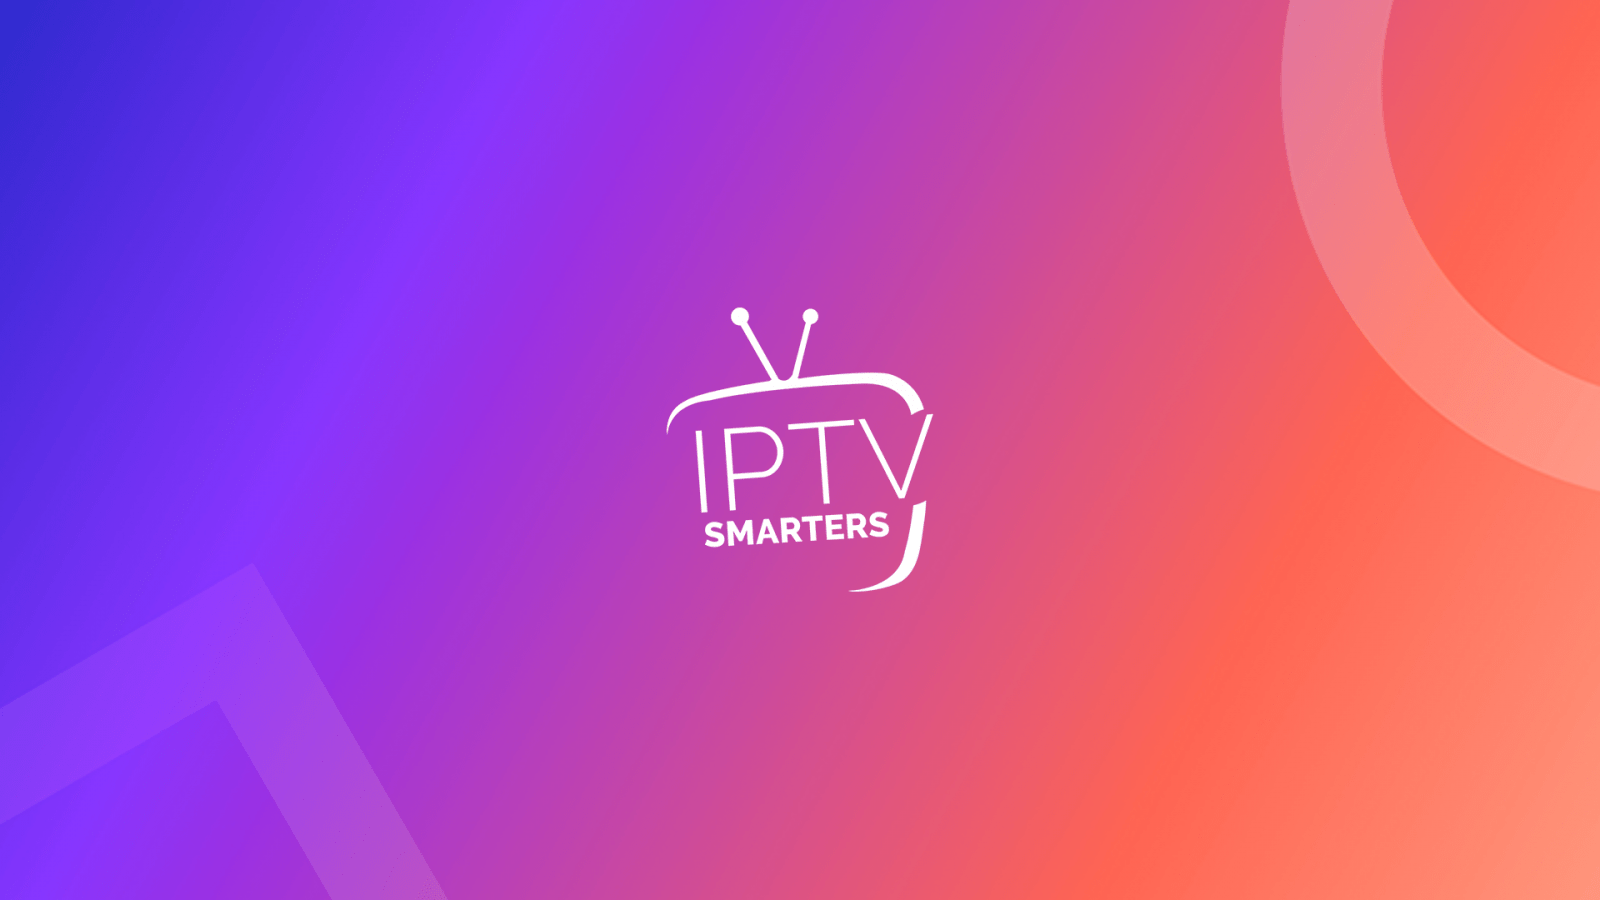 How to install IPTV Smarters on Firestick?